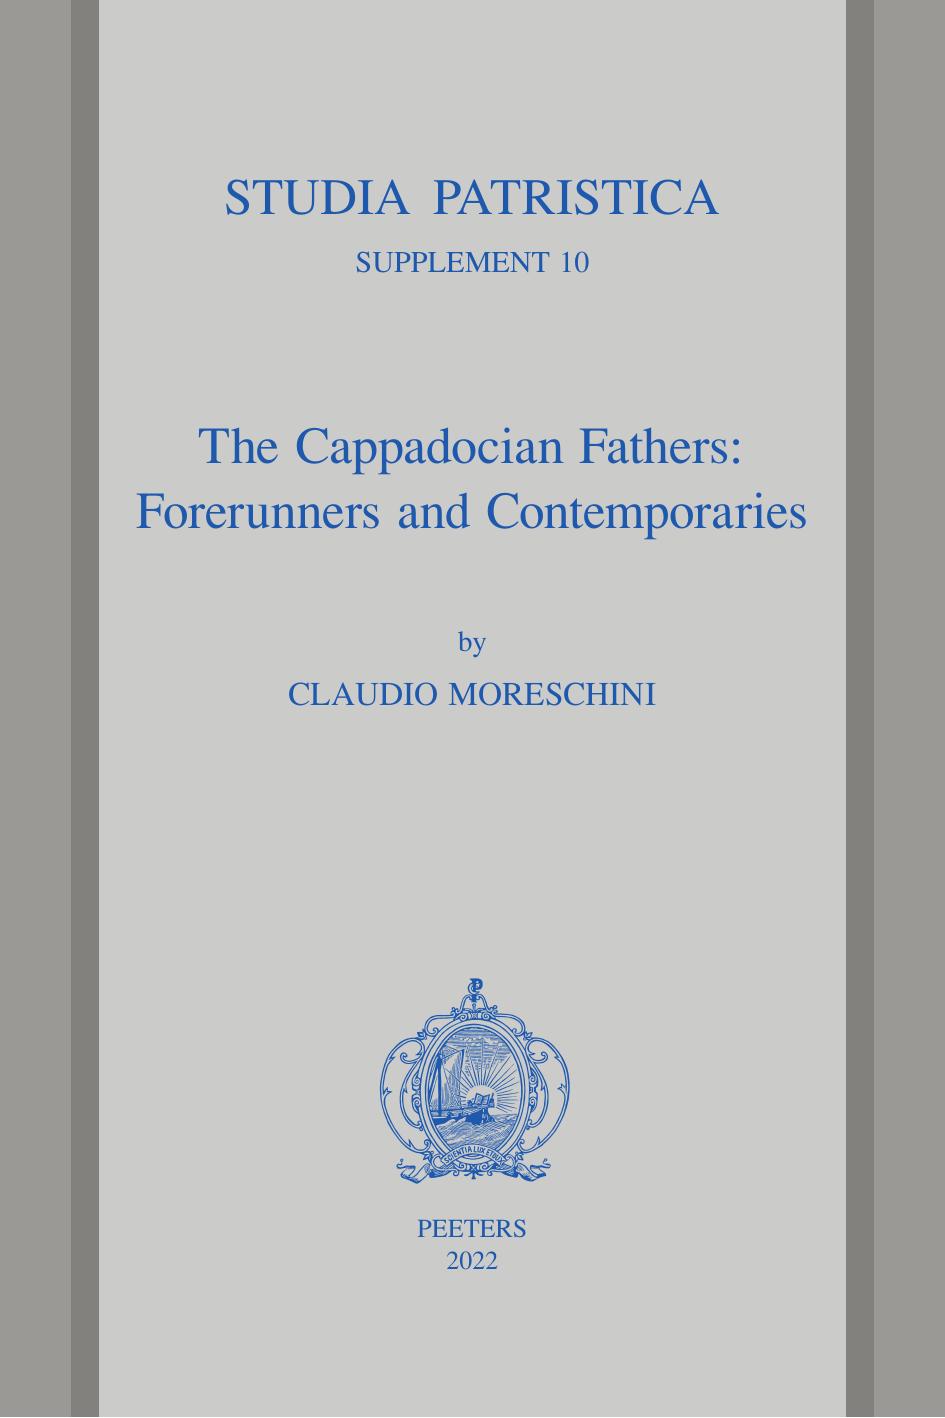 The Cappadocian Fathers: Forerunners and Contemporaries by Claudio Moreschini